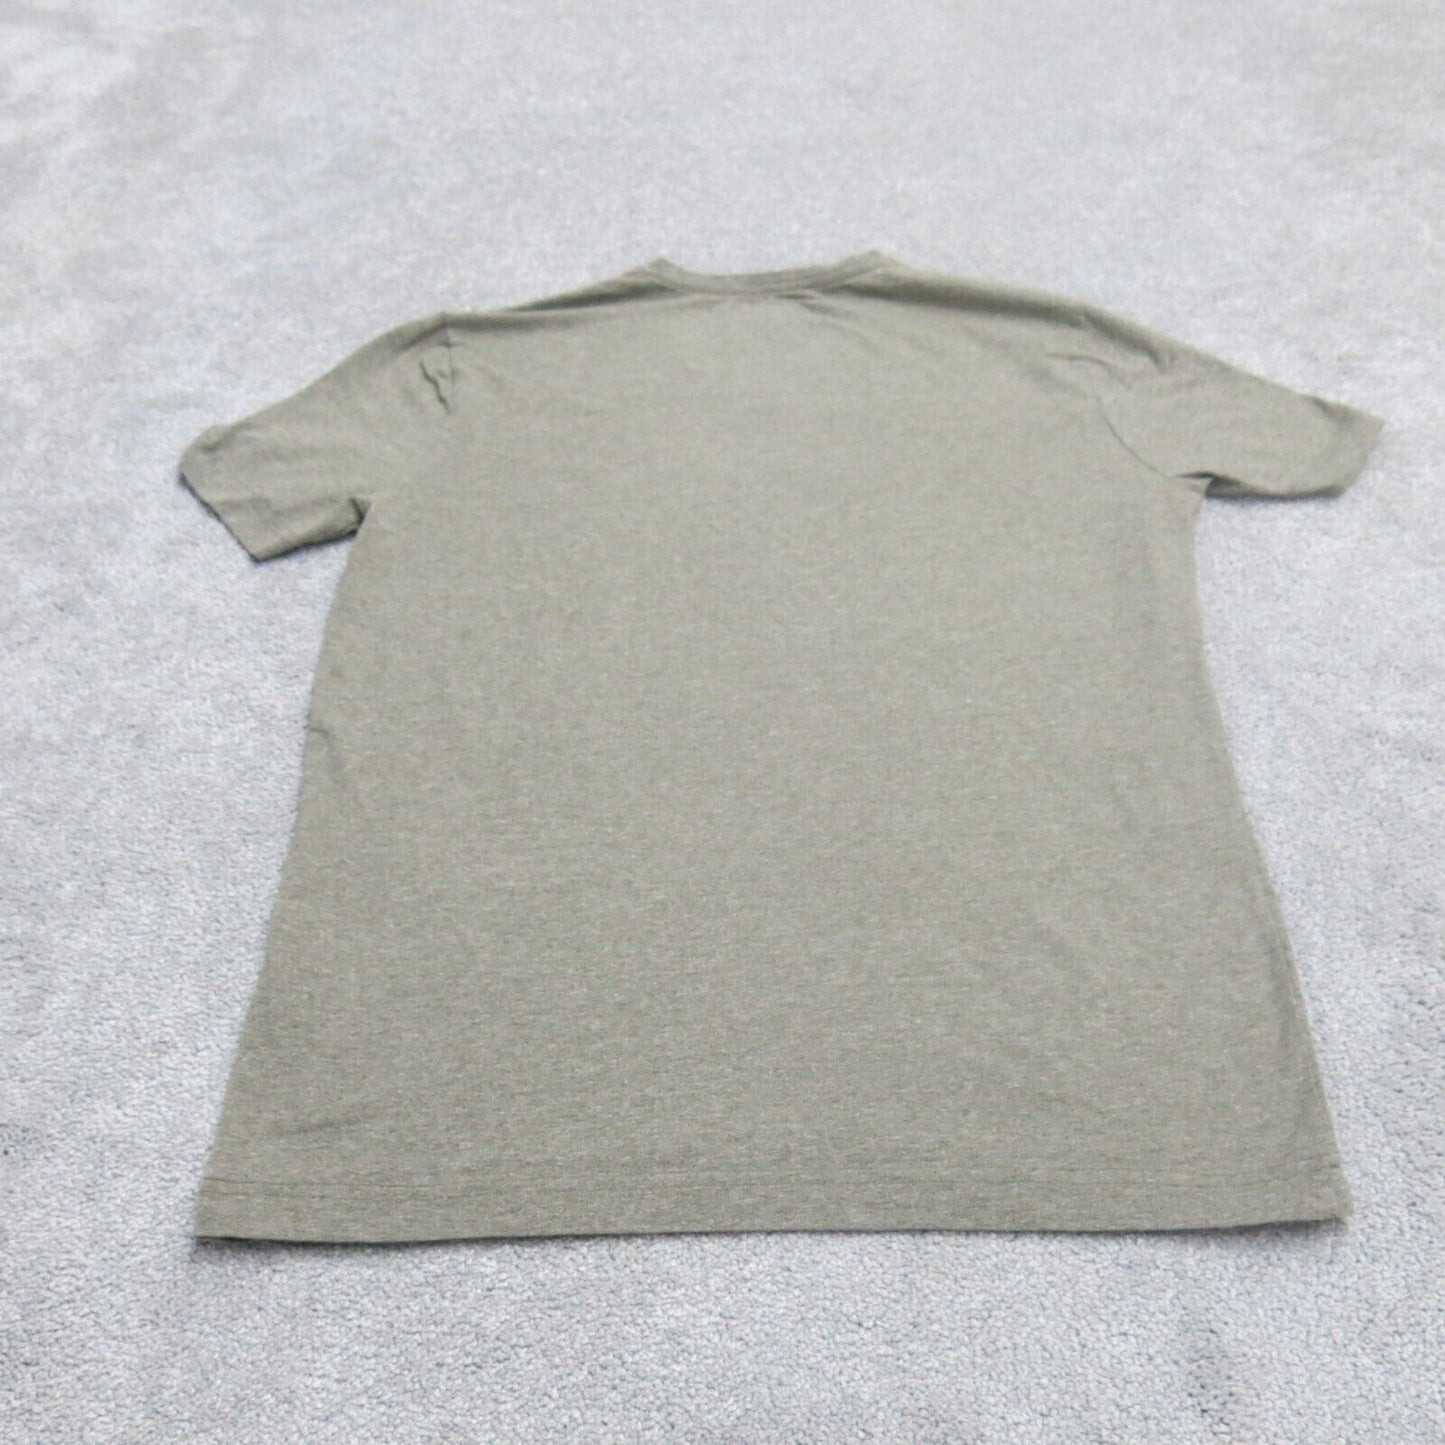 H&M Womens Slim Fit Casual V Neck T Shirt Short Sleeves Olive Green Size Medium